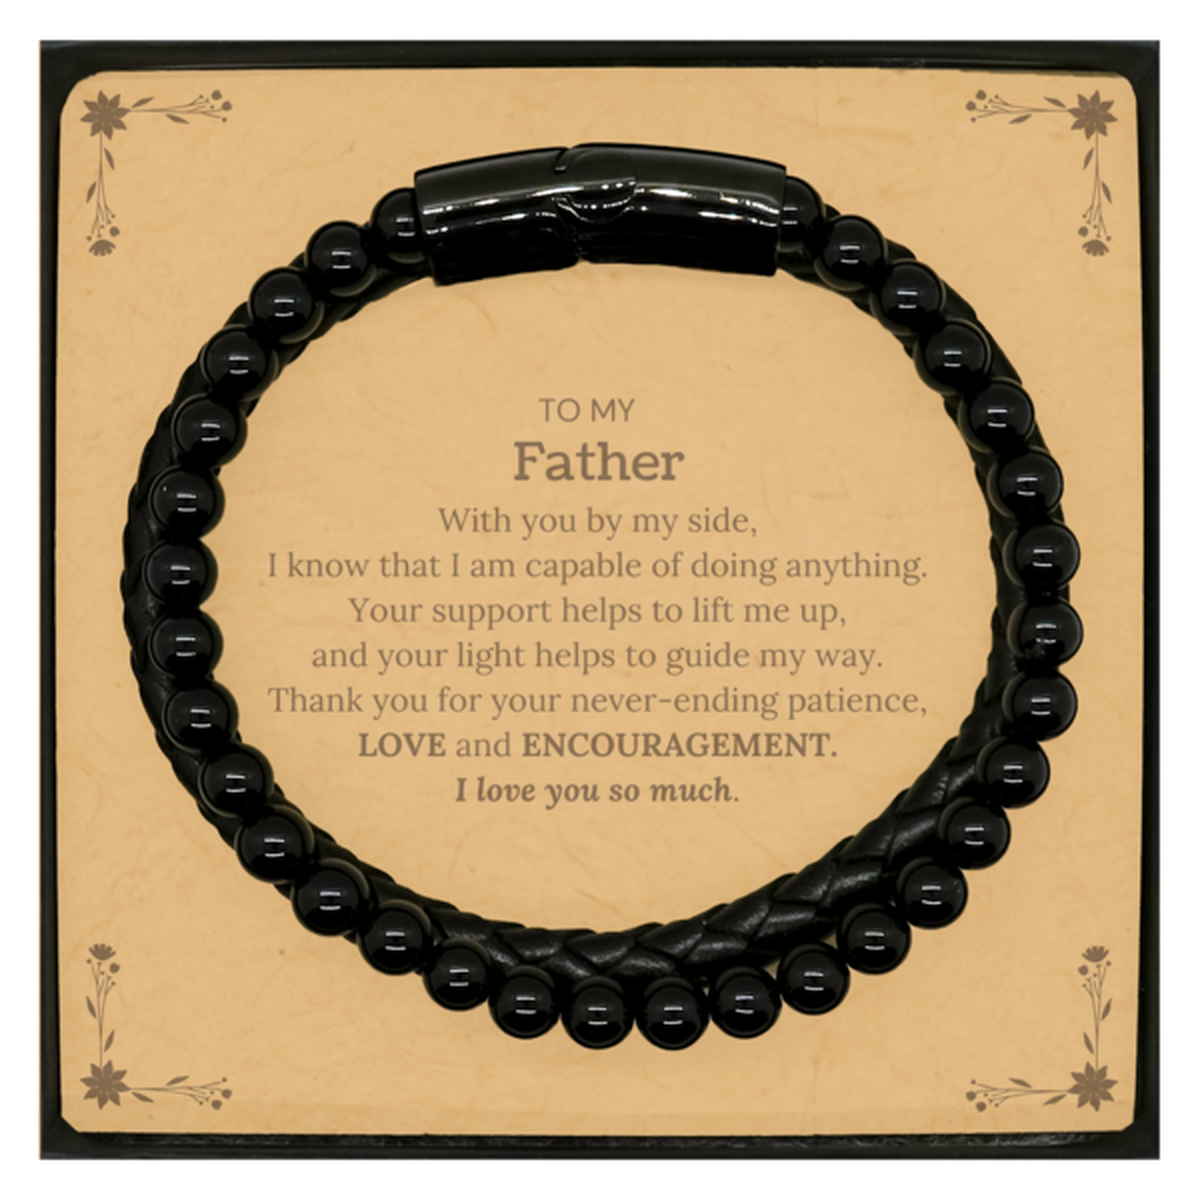 Appreciation Father Stone Leather Bracelets Gifts, To My Father Birthday Christmas Wedding Keepsake Gifts for Father With you by my side, I know that I am capable of doing anything. I love you so much